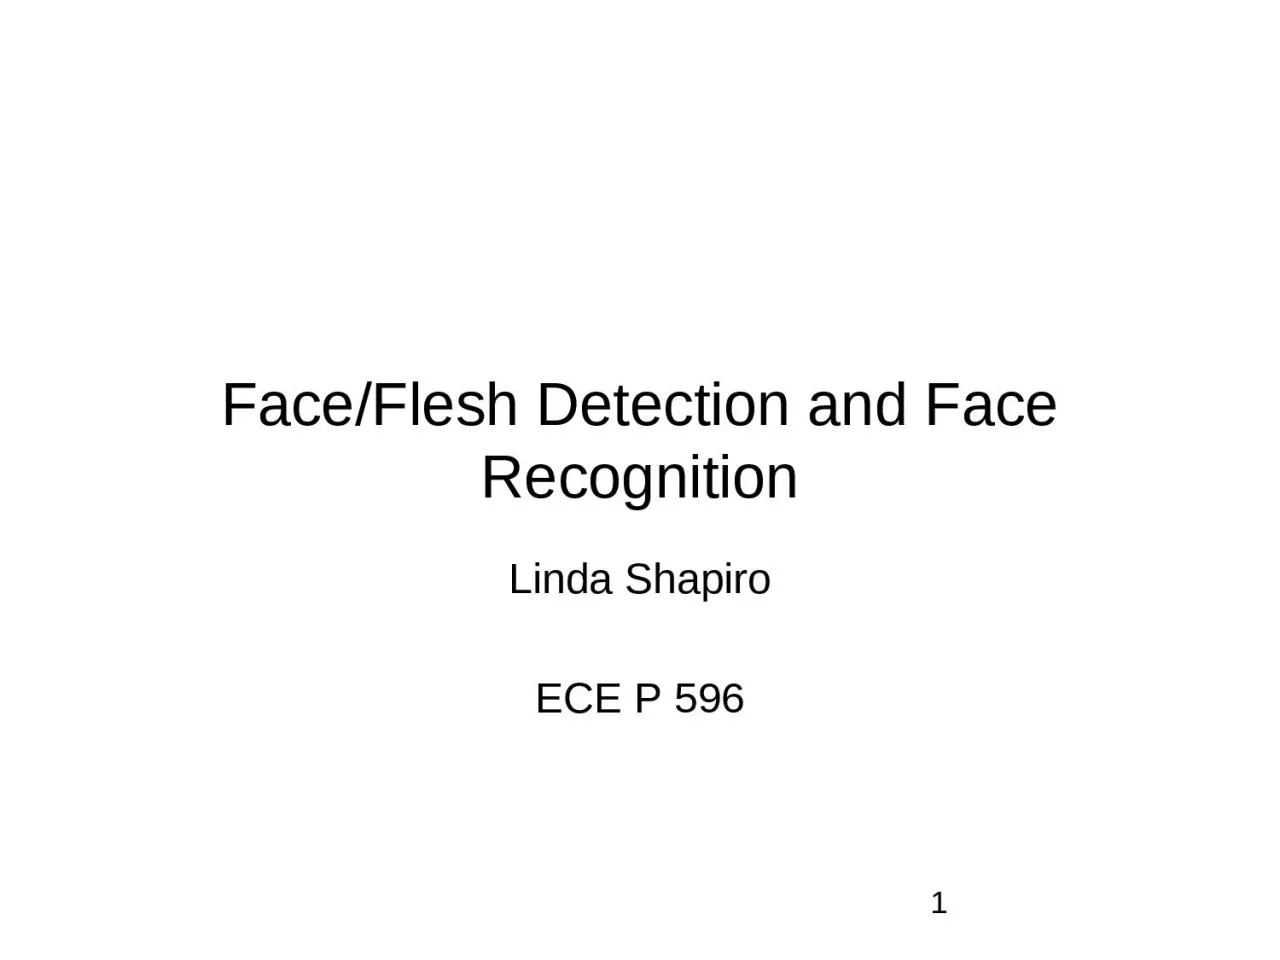 Face/Flesh Detection and Face Recognition